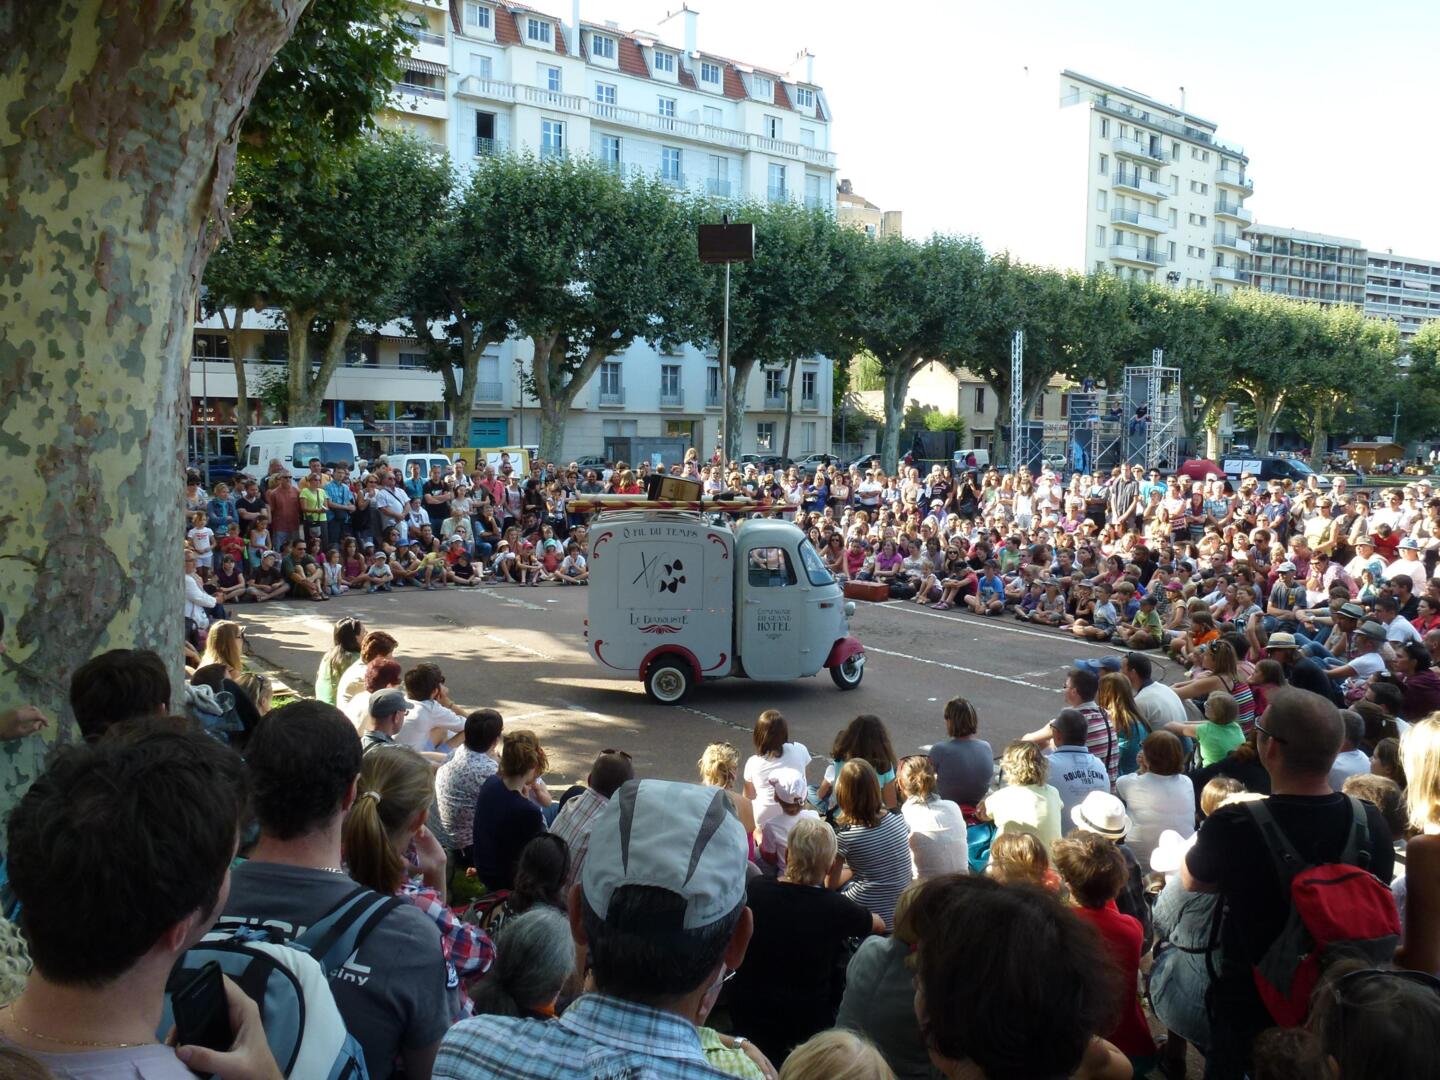 Engaged audience watching a street performance at the 'Chalon dans la Rue' festival, with a performance vehicle parked in front of seated spectators.